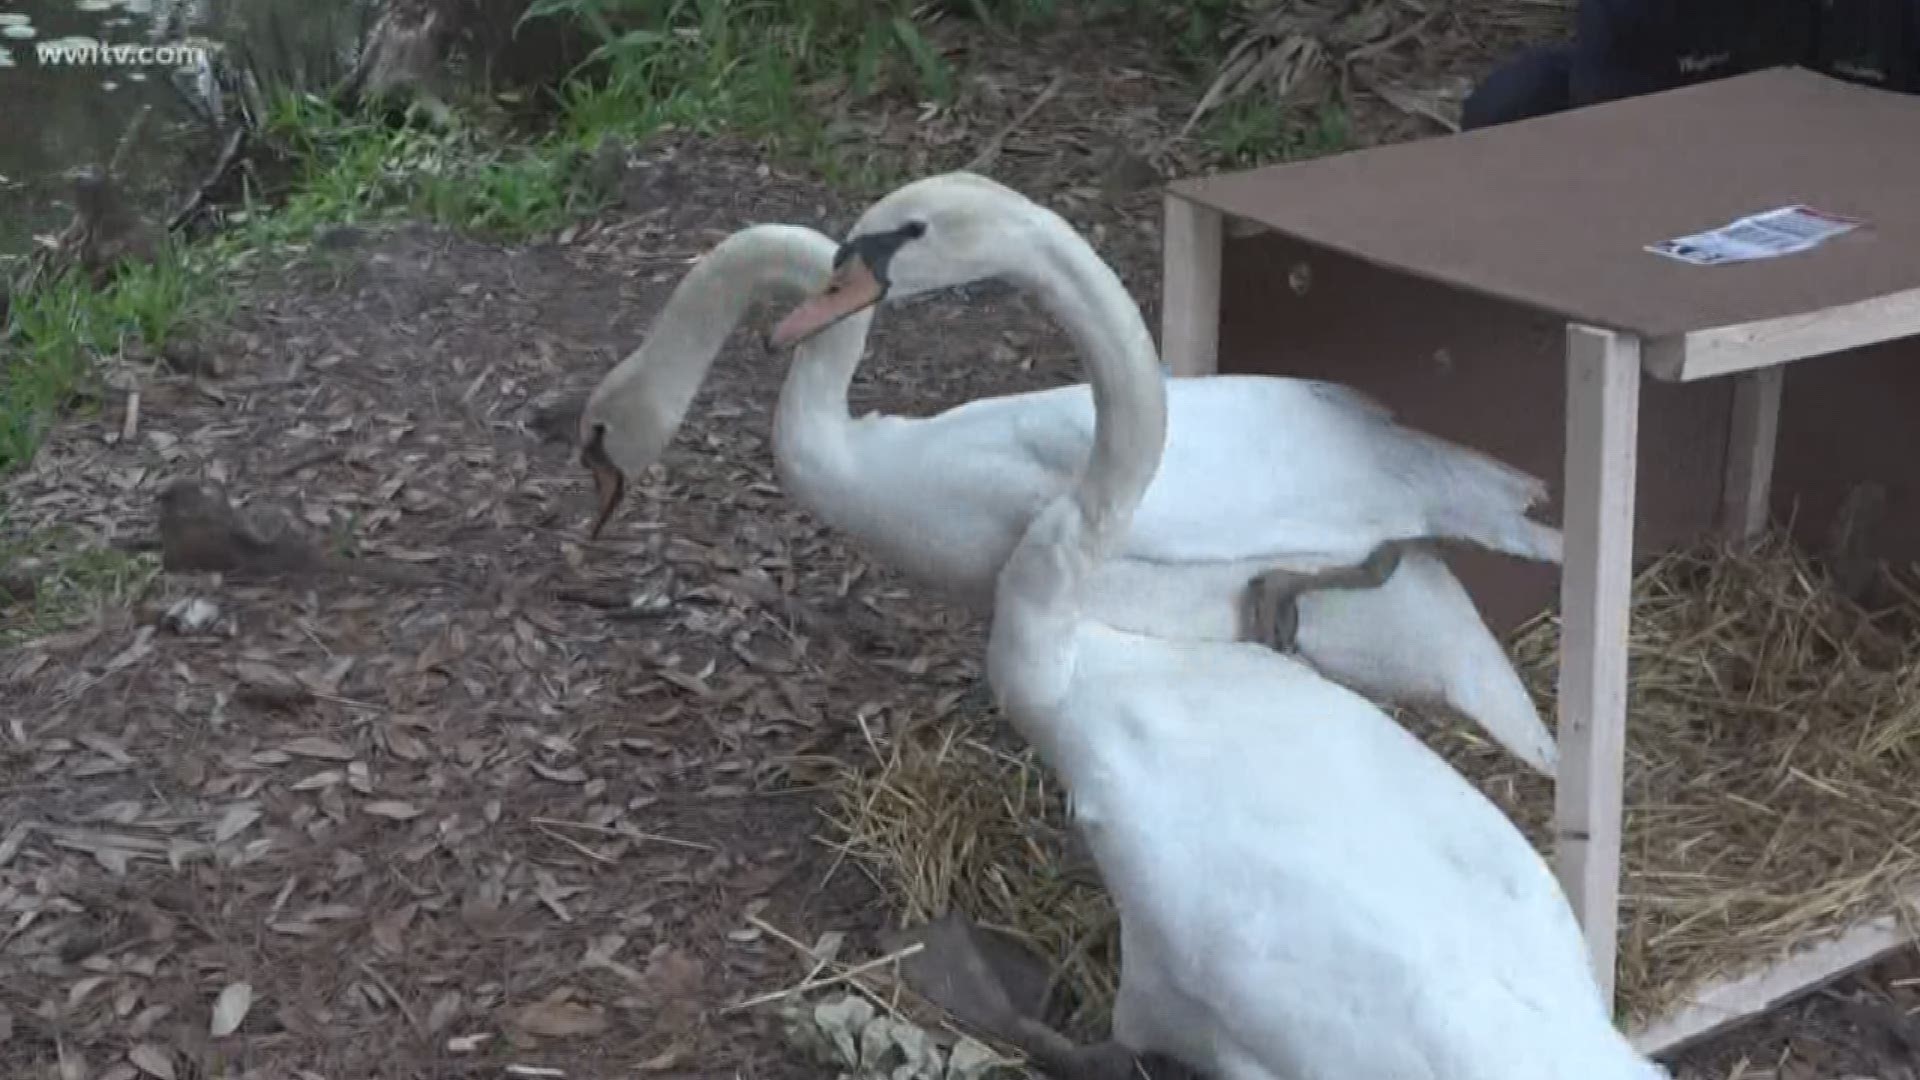 City Park officially welcomed Fred, Ginger, Benedick and Beatrice, four new swans, to New Orleans Thursday.